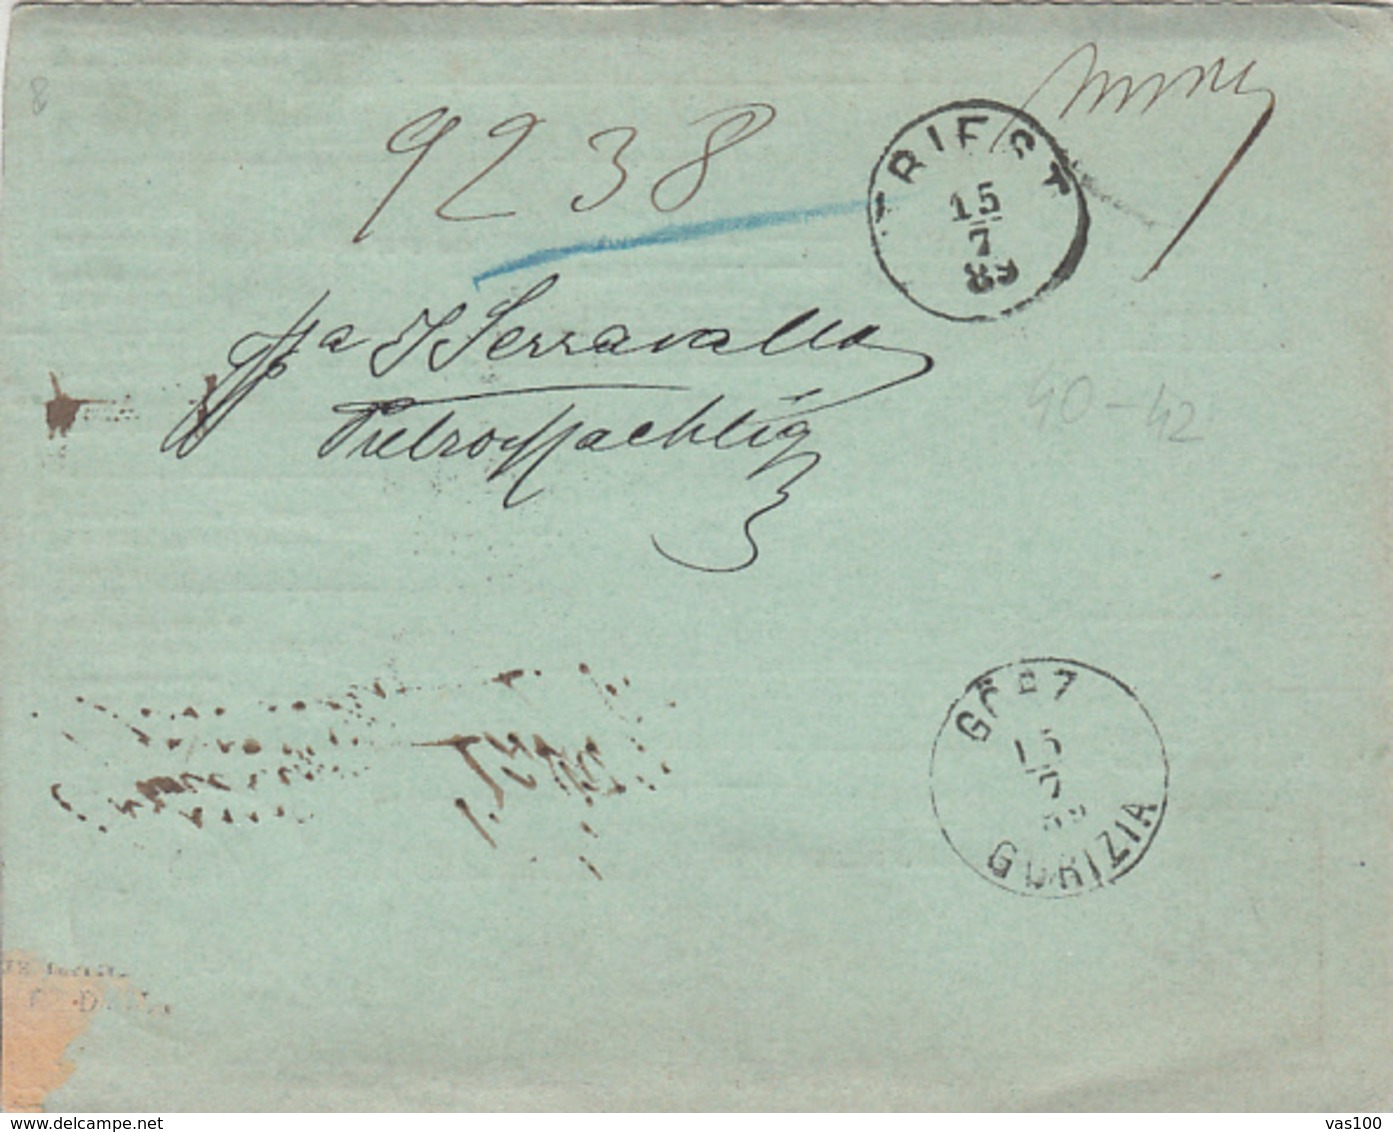 KING UMBERTO I, POSTAL PARCEL STATIONERY, ENTIER POSTAL, SENT FROM PALERMO TO TRIESTE, 1889, ITALY - Colis-postaux